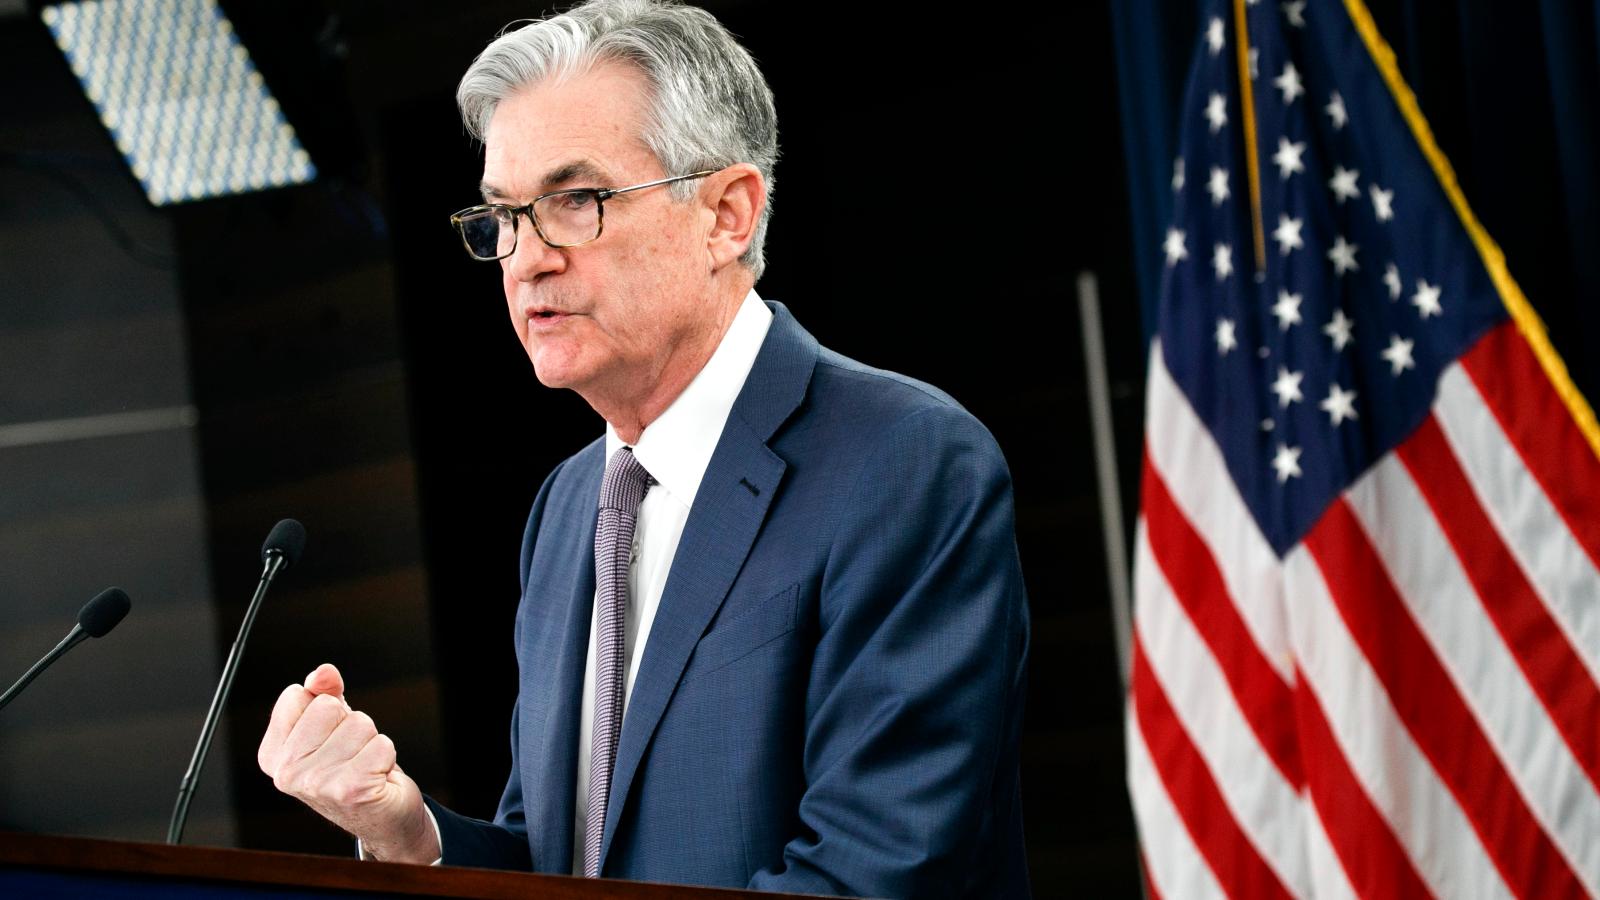 Fed minutes indicate the Fed's strong response to the virus